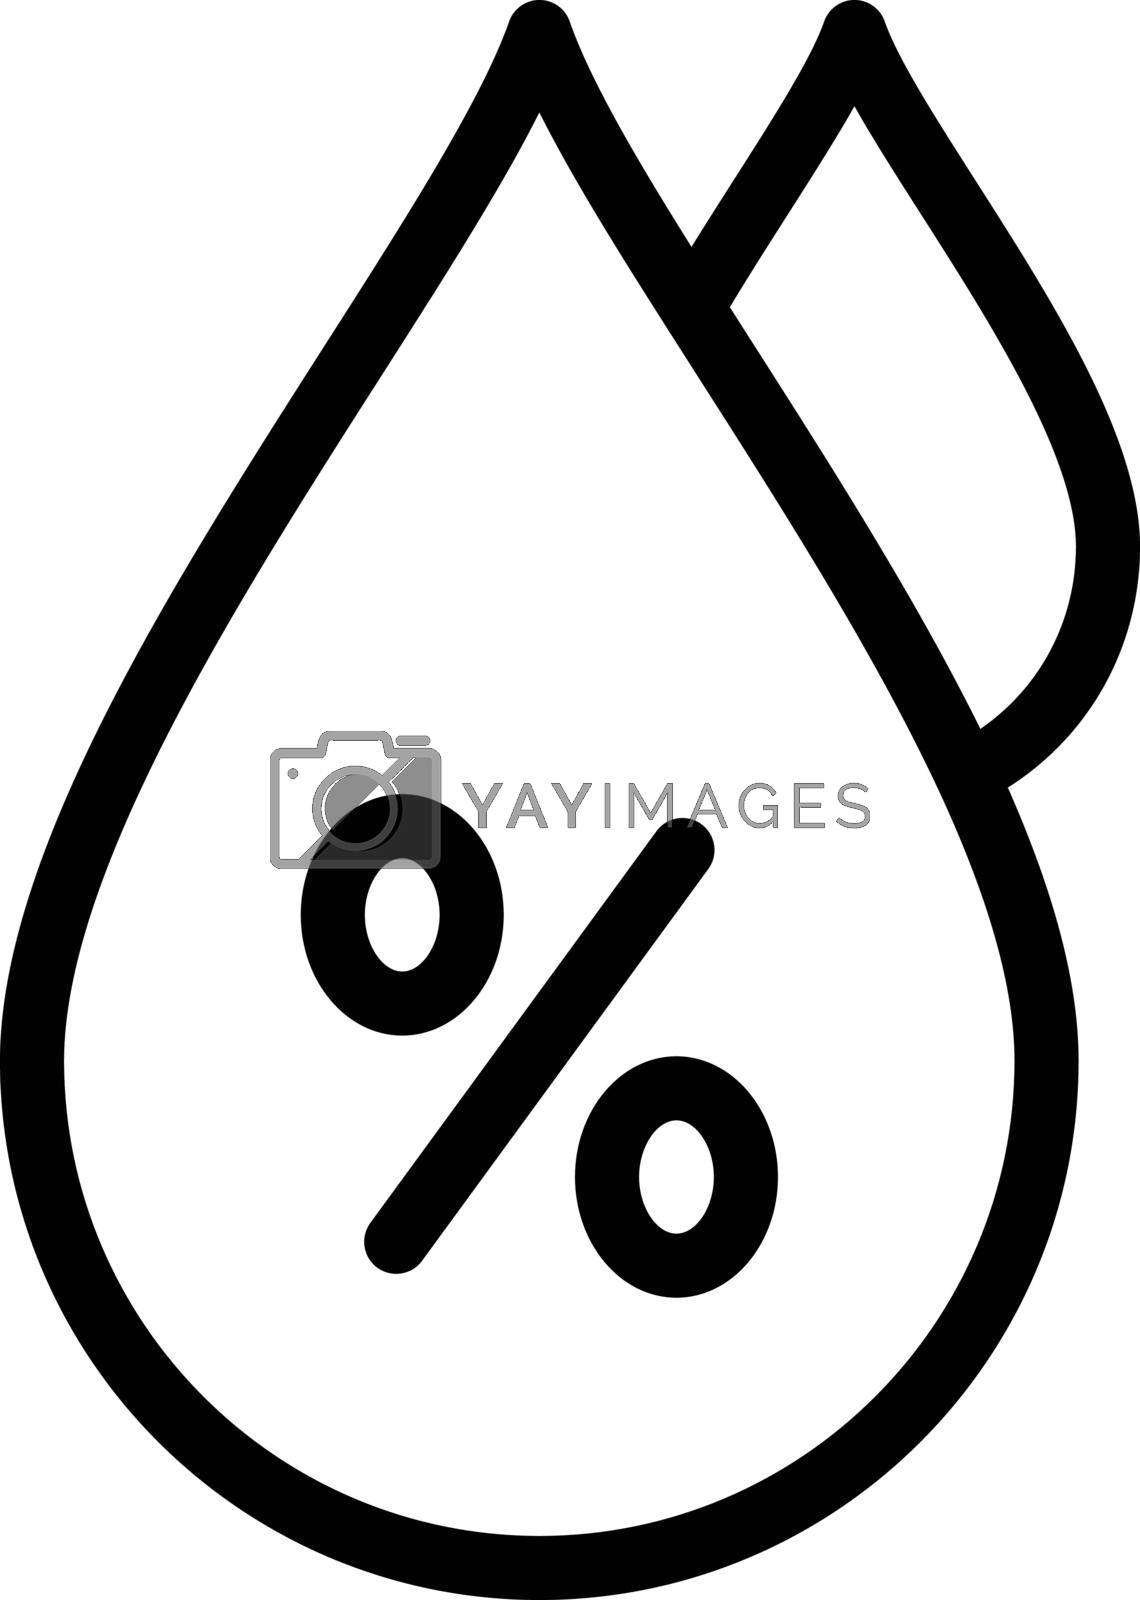 weather Vector illustration on a transparent background. Premium quality symbols. Stroke vector icon for concept and graphic design.